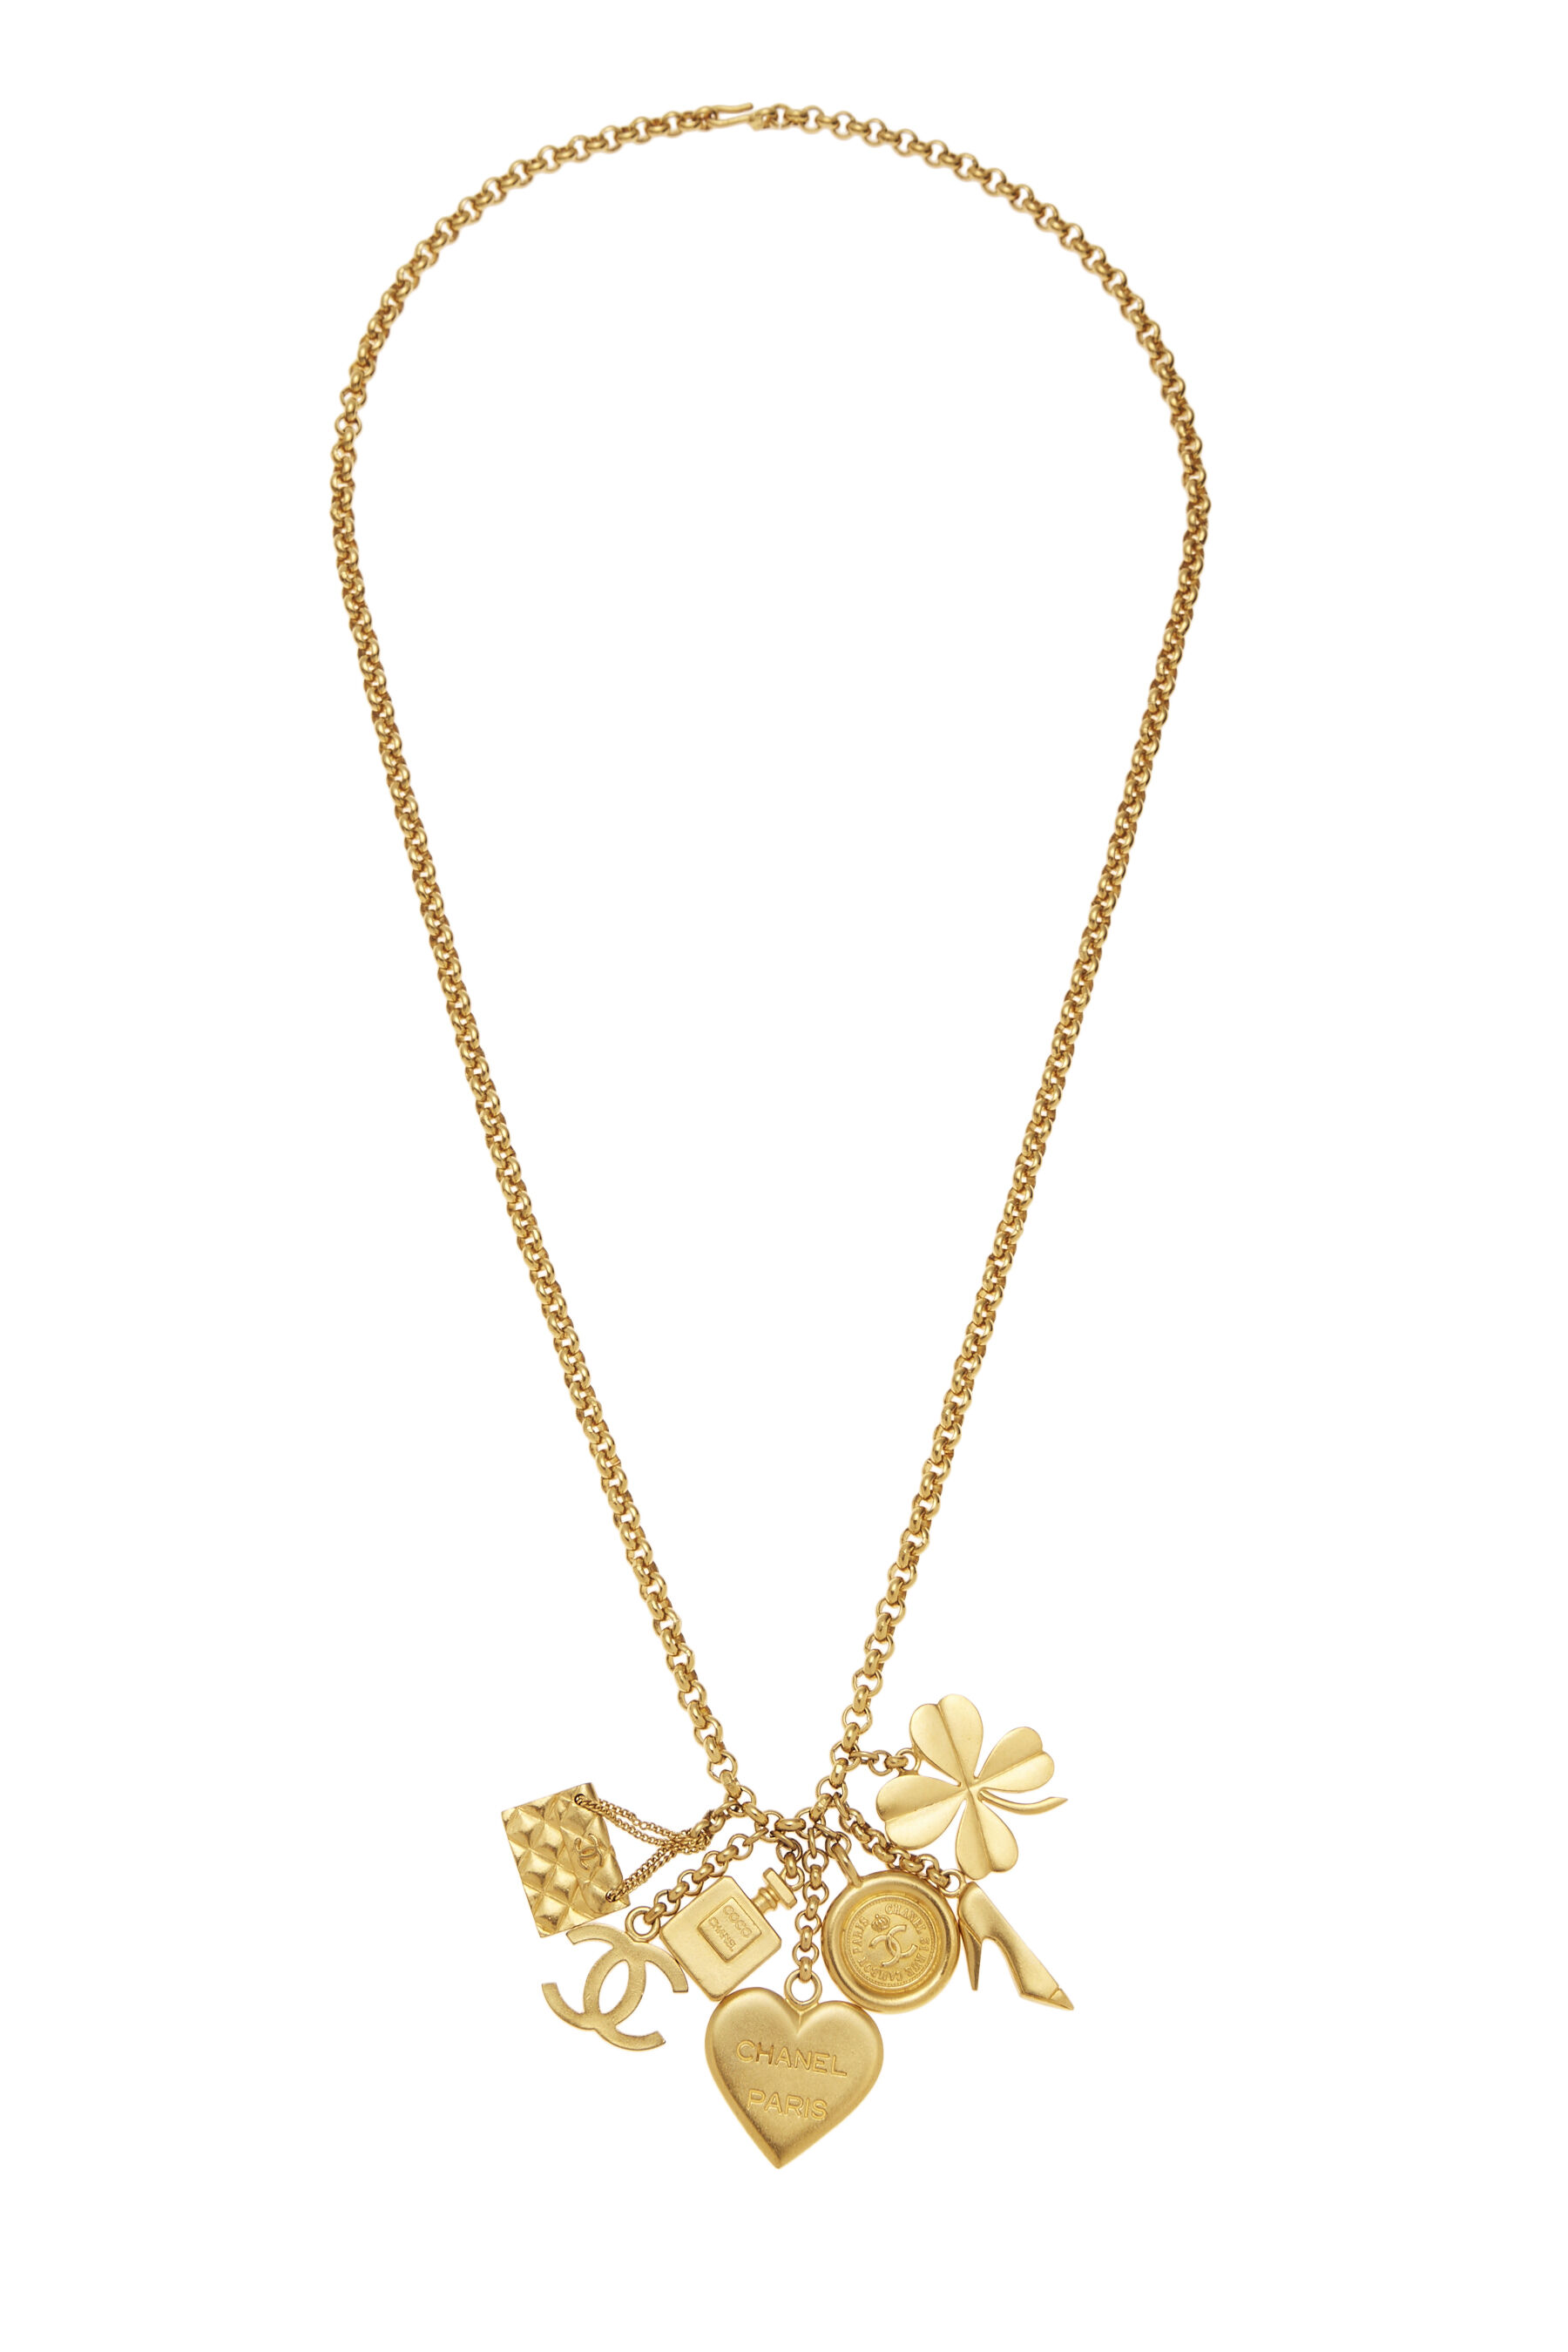 Chanel - Gold Icon Charm Necklace